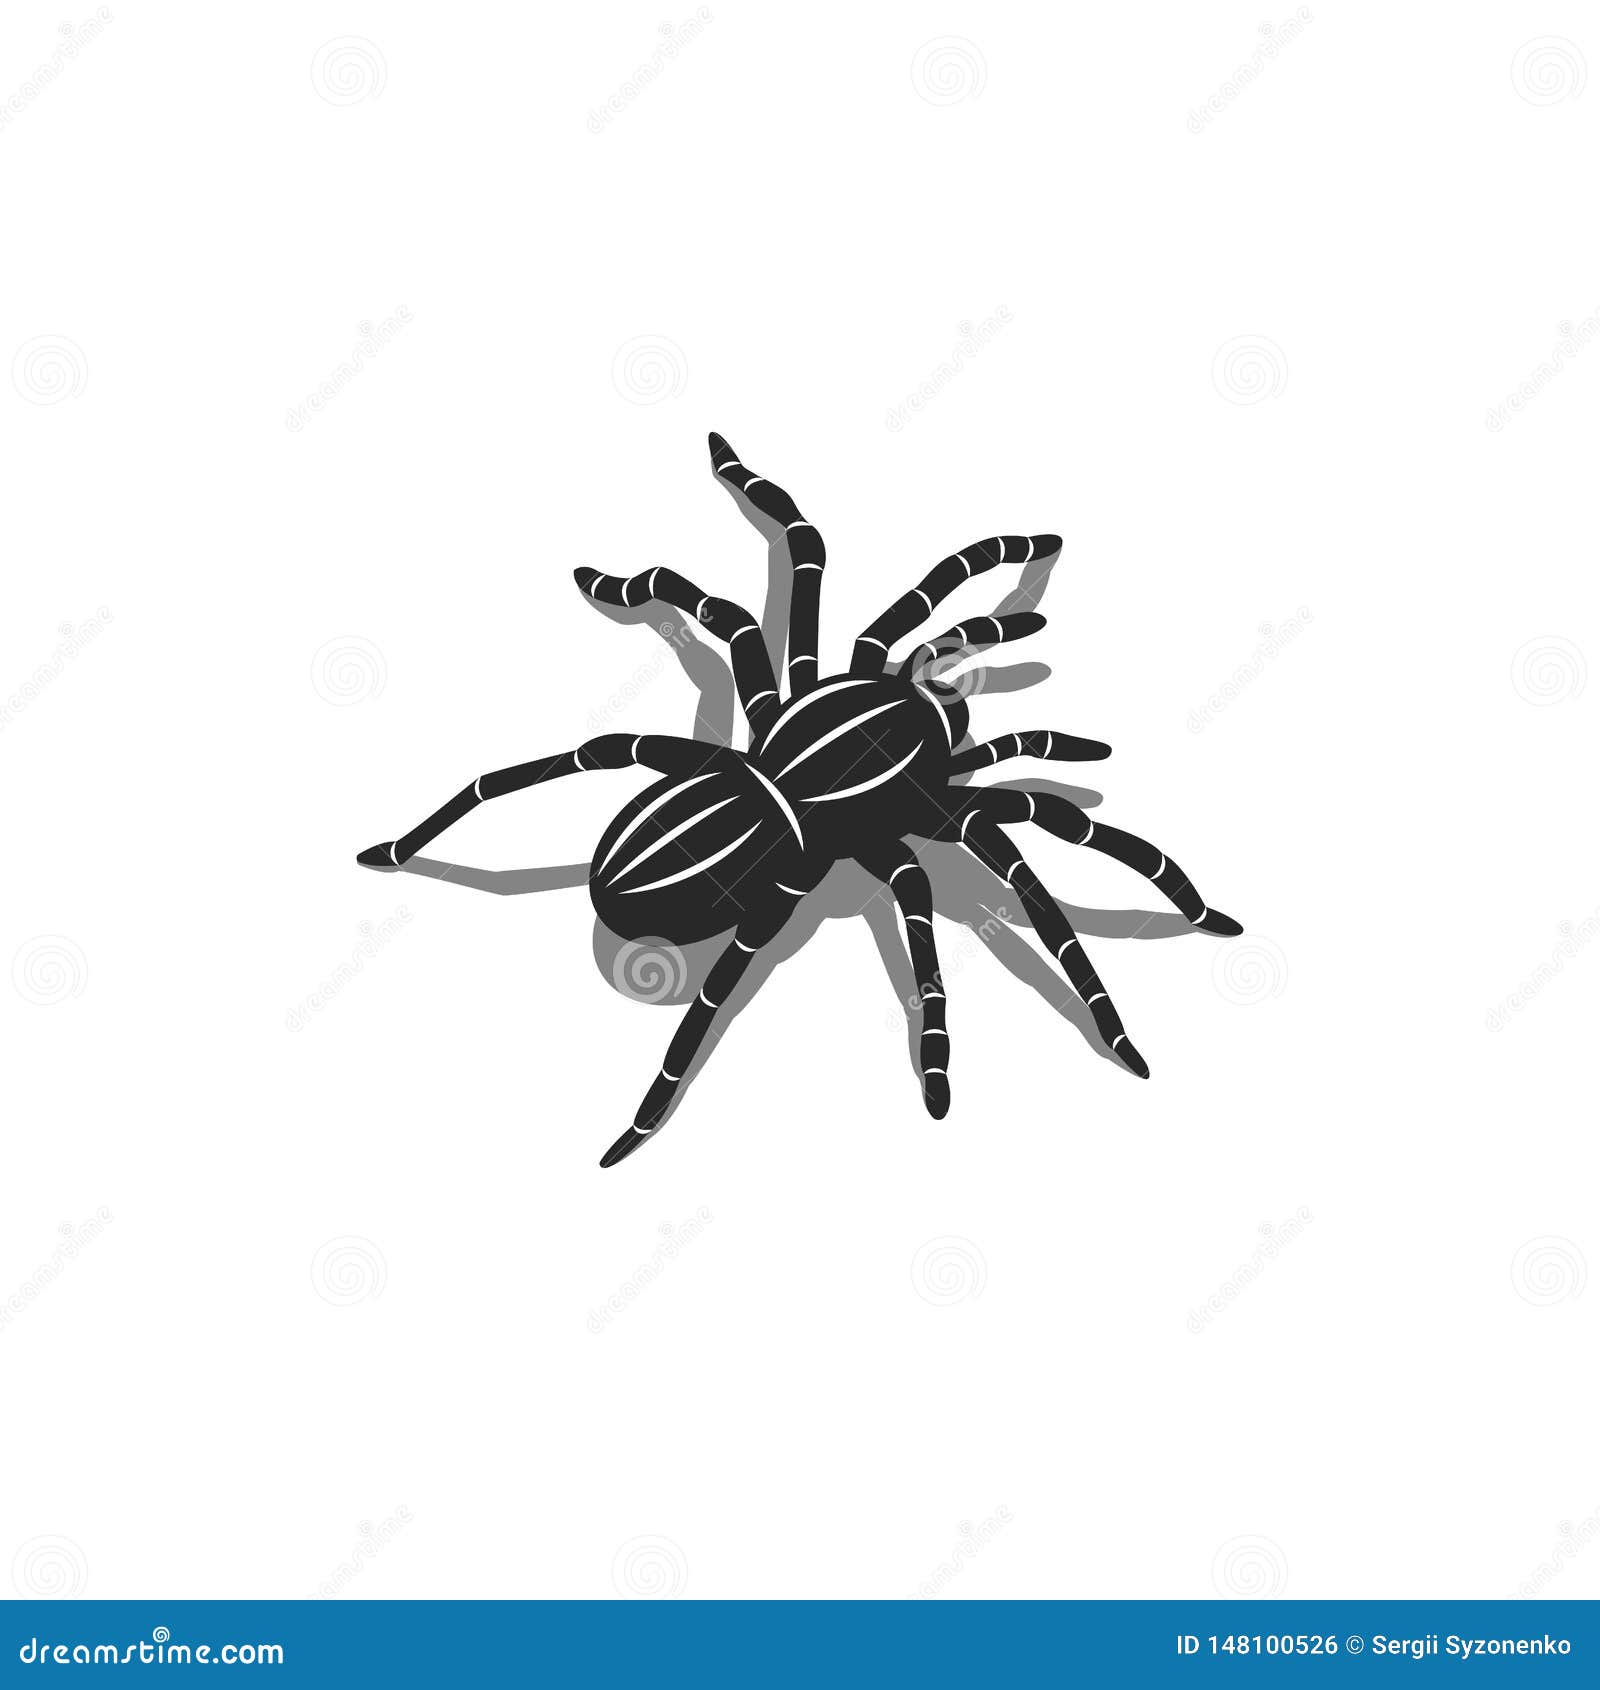 Silhouette of a Spider Tarantula Insect in Isometric Shape with Shadows, 3D  Tattoo Design Stock Vector - Illustration of animal, insect: 148100526